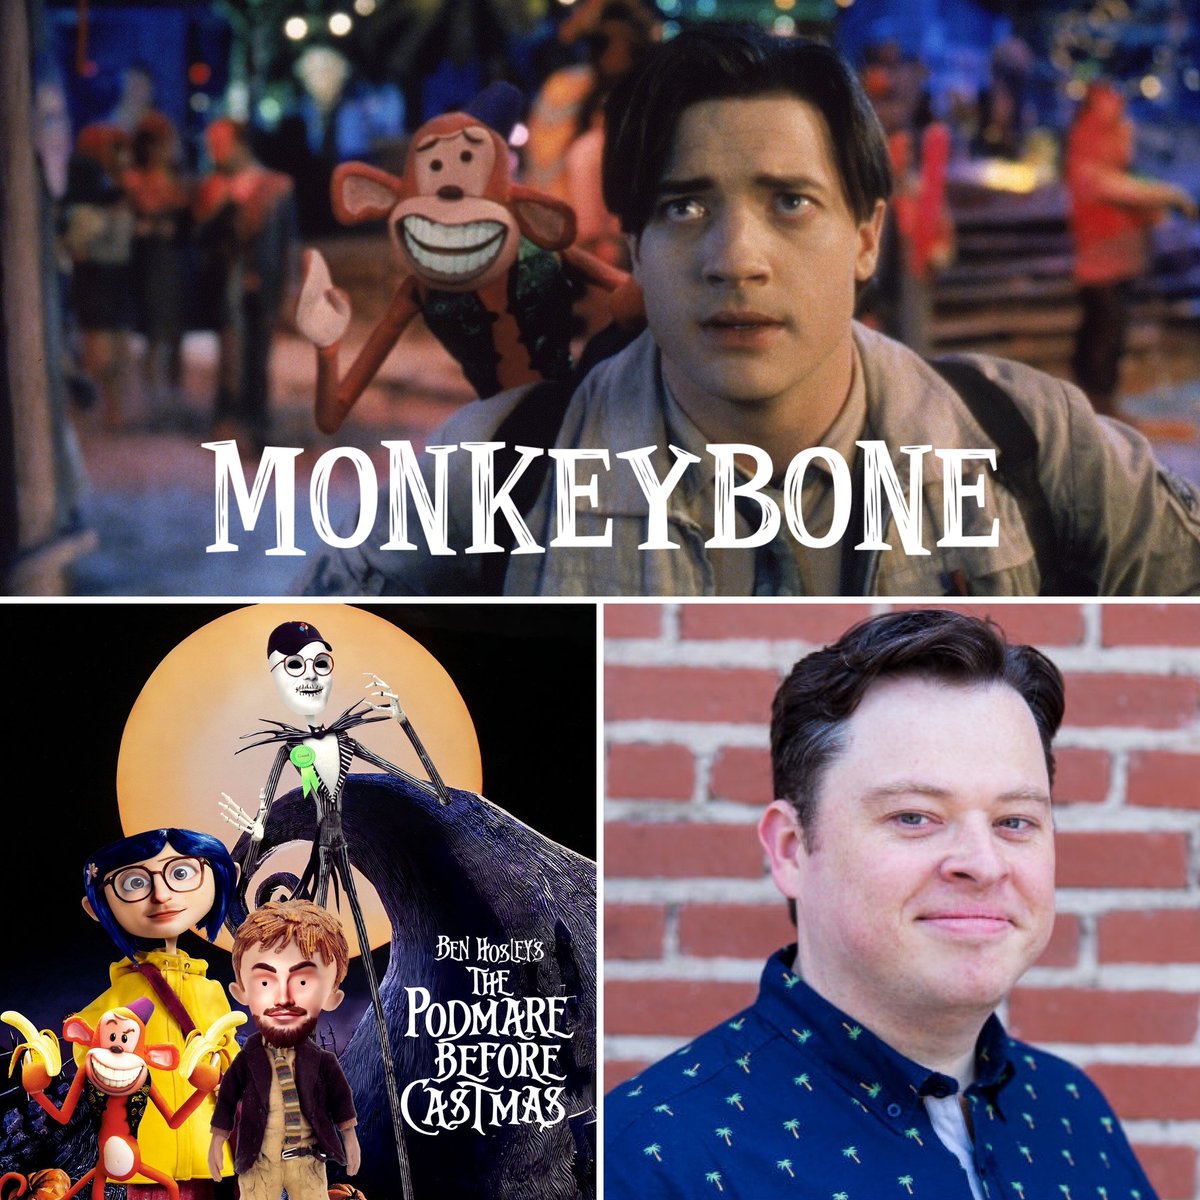 Okay boners - get your loose cabooses in gear, 'cause we're going to Dark Town! @JustinMcElroy watched this movie seven times and he will never get those hours back, but our MONKEYBONE episode was definitely worth it. Our latest podcast is available now: audioboom.com/posts/8211136-…